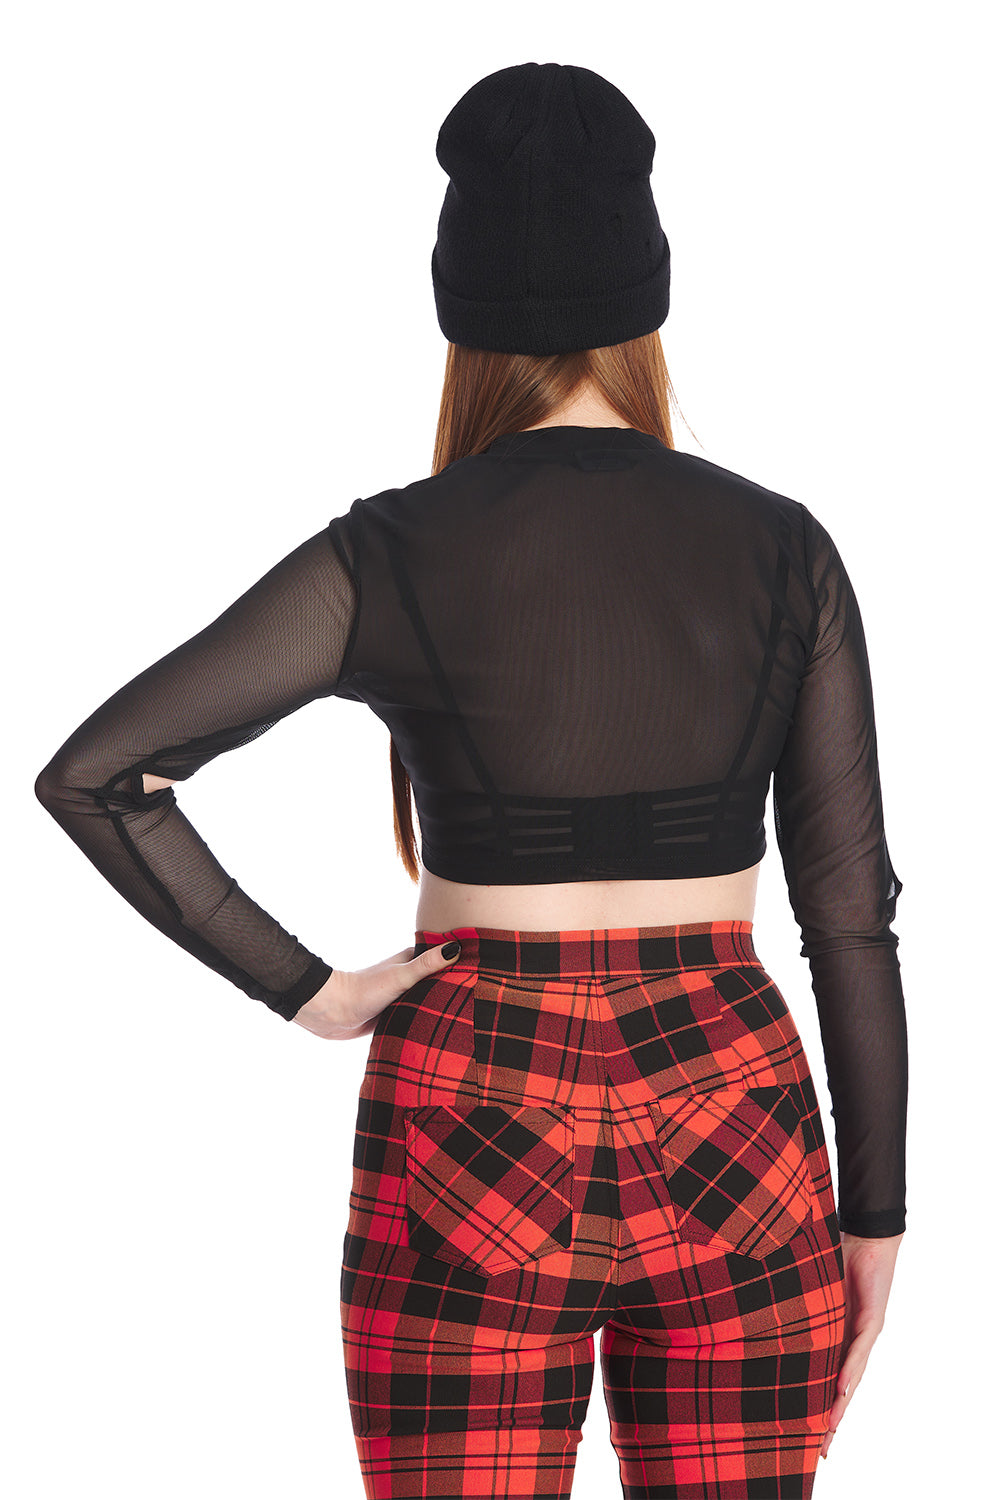 Model wears orange tartan high waisted trousers with a crop mesh top in black and beanie hat